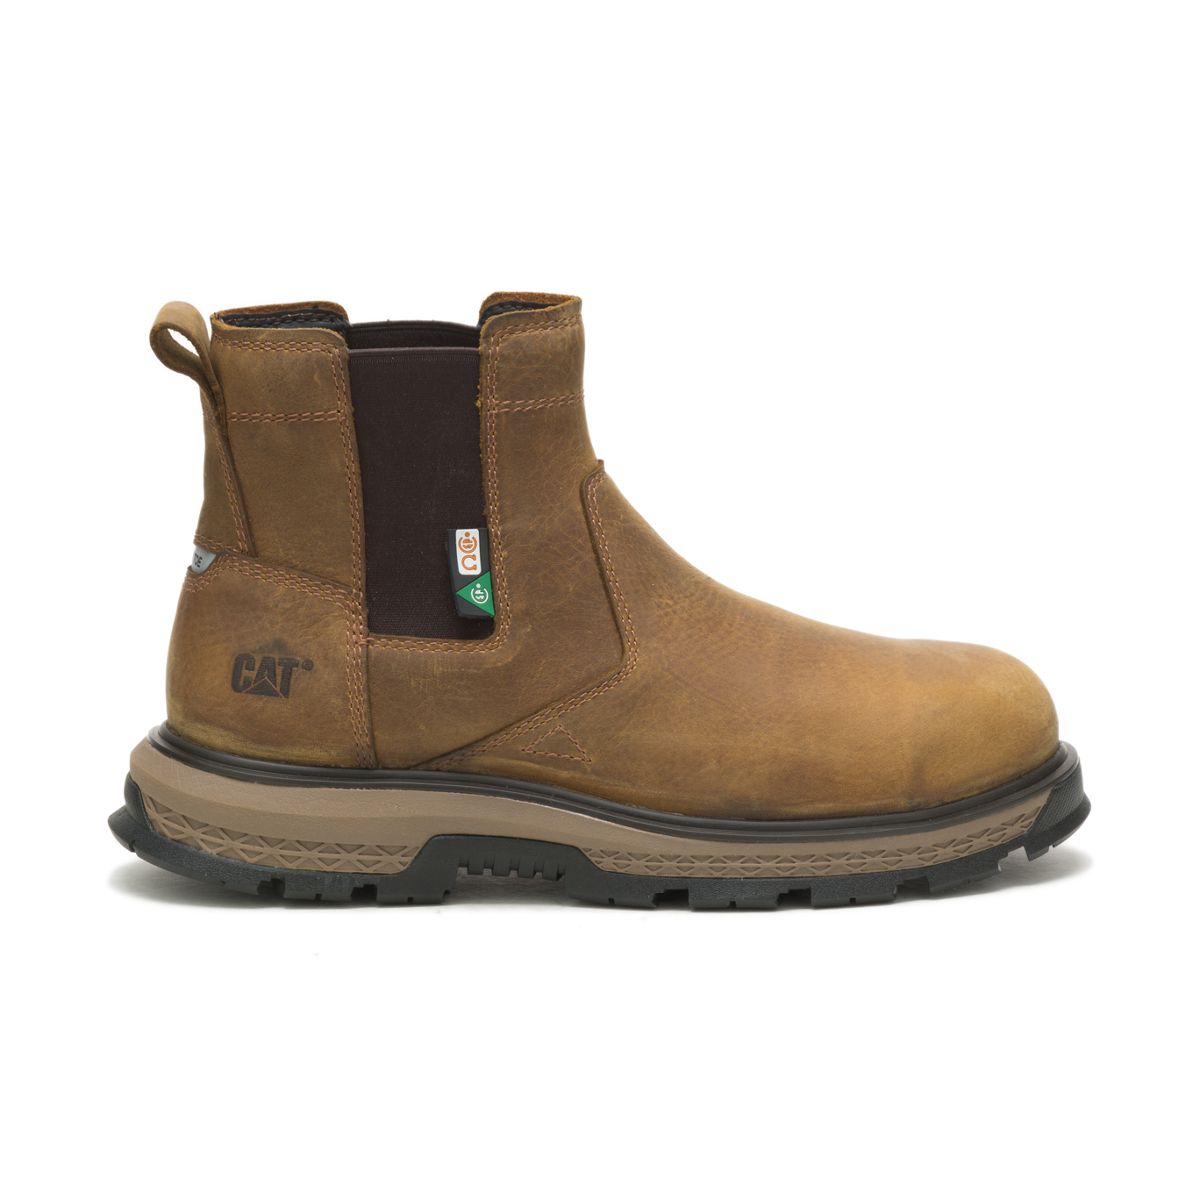 CAT: UTAH (Brown) Safety Boots The Whitby Cobbler, 44% OFF